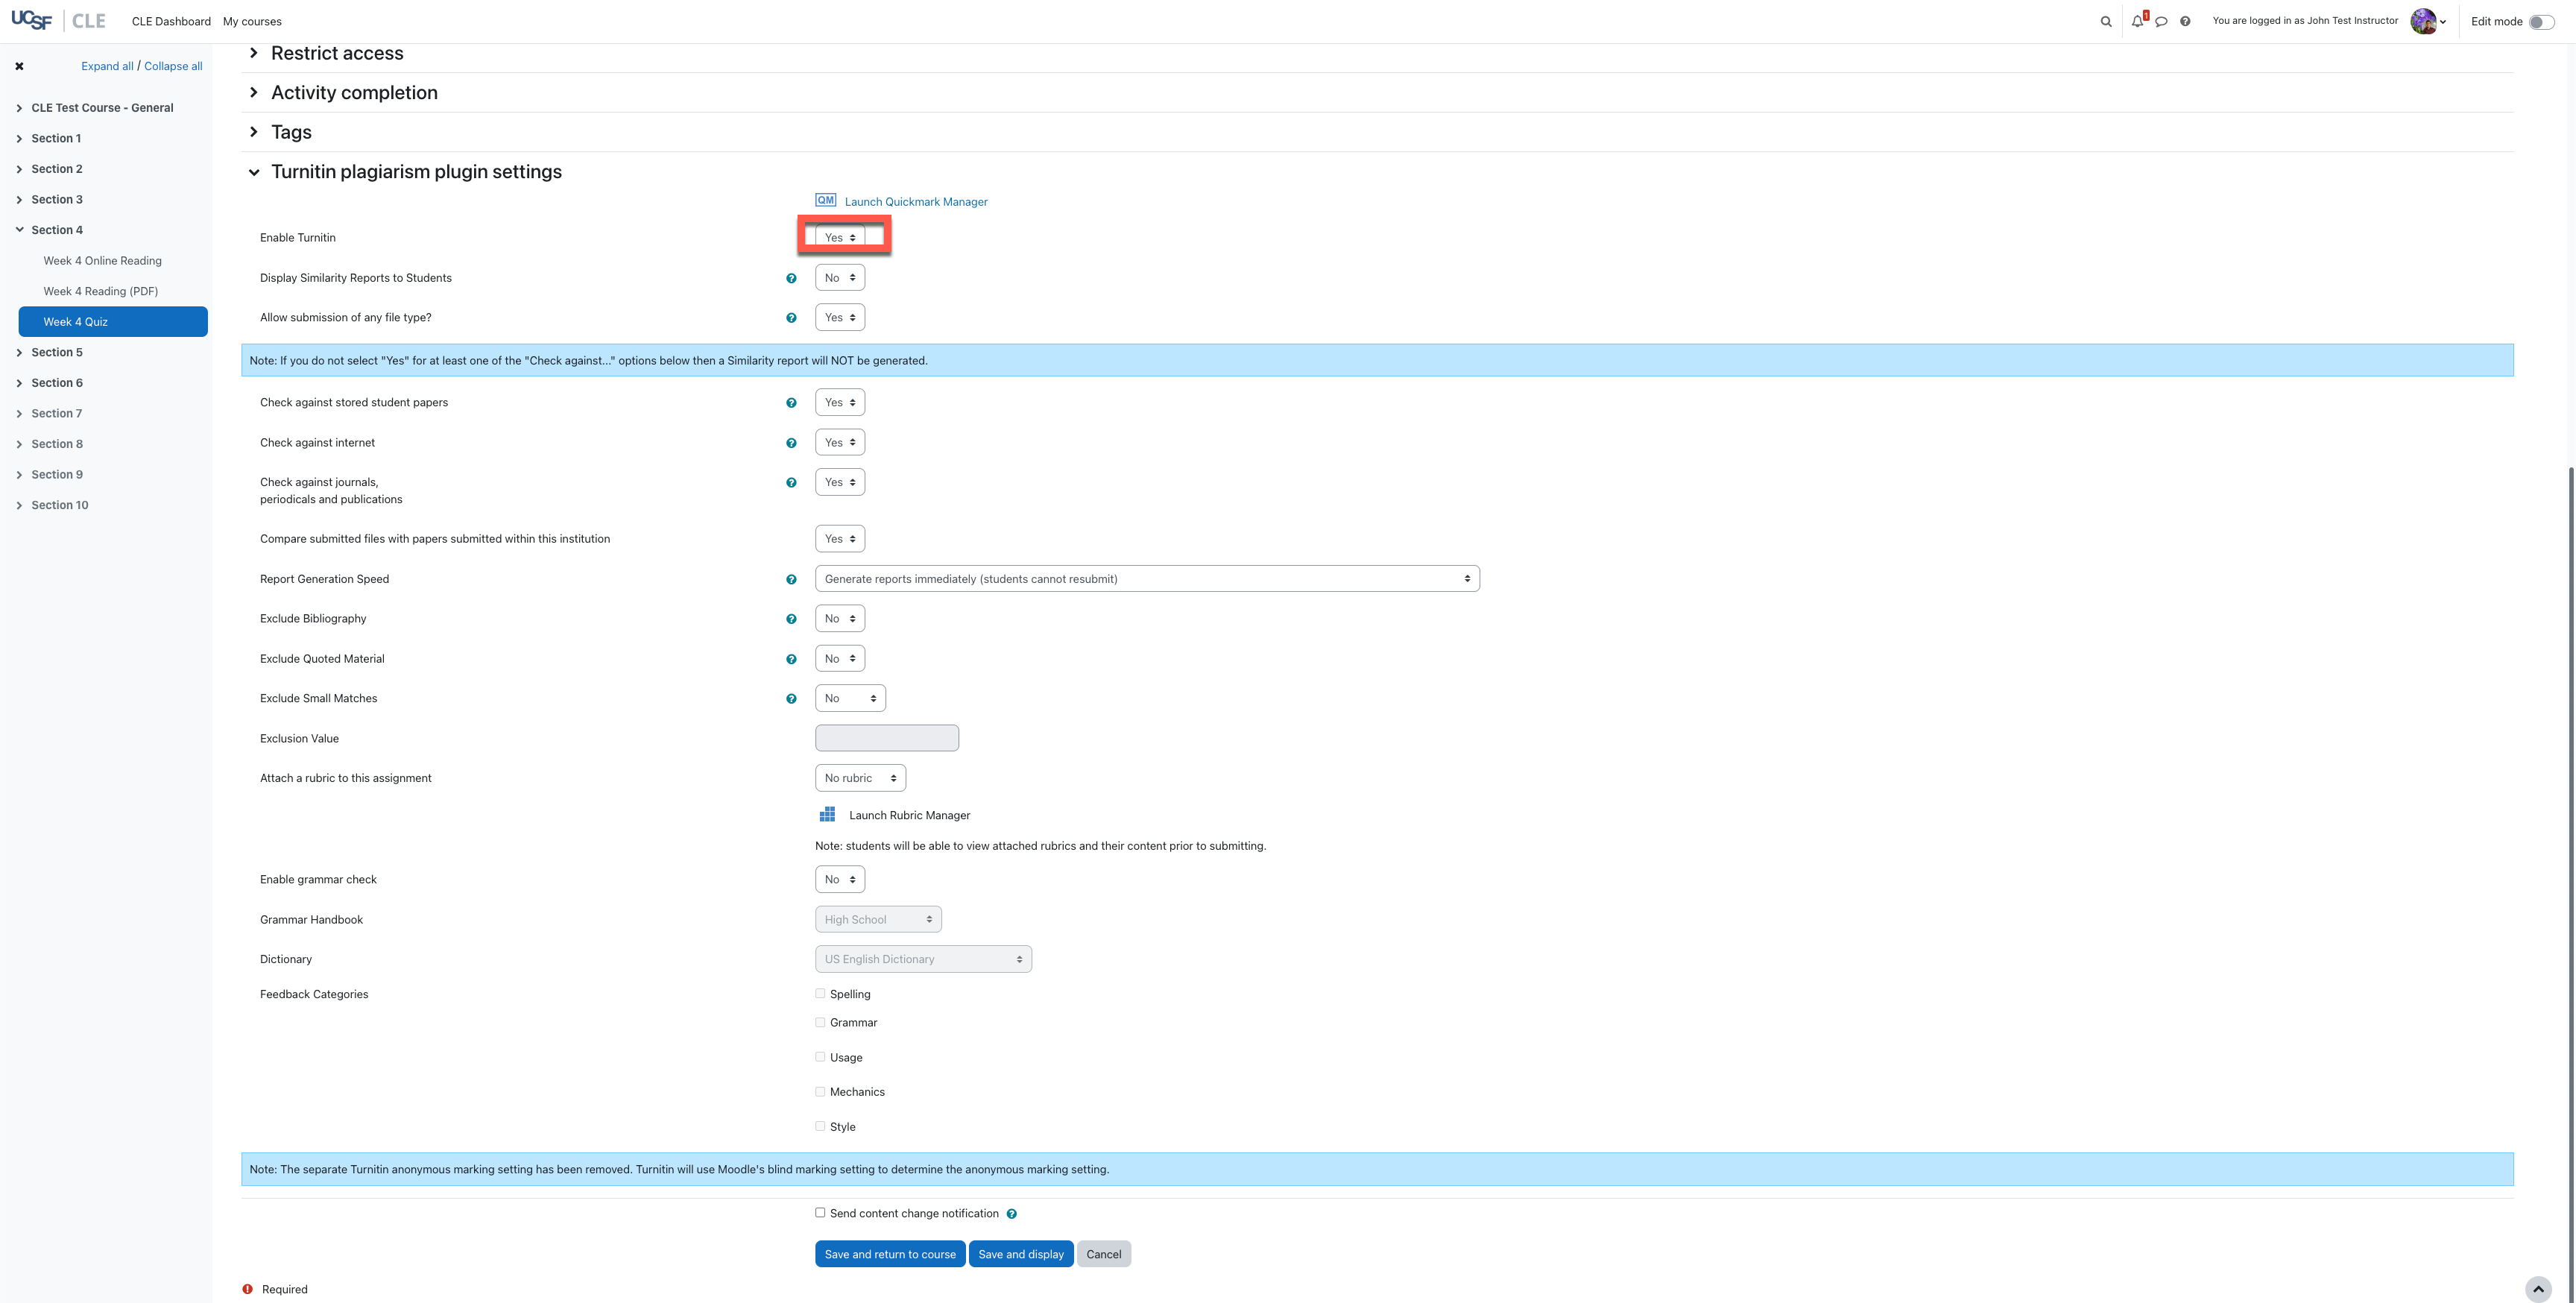 A screenshot of the Turnitin plagiarism plugin settings in a new quiz in a CLE course.png